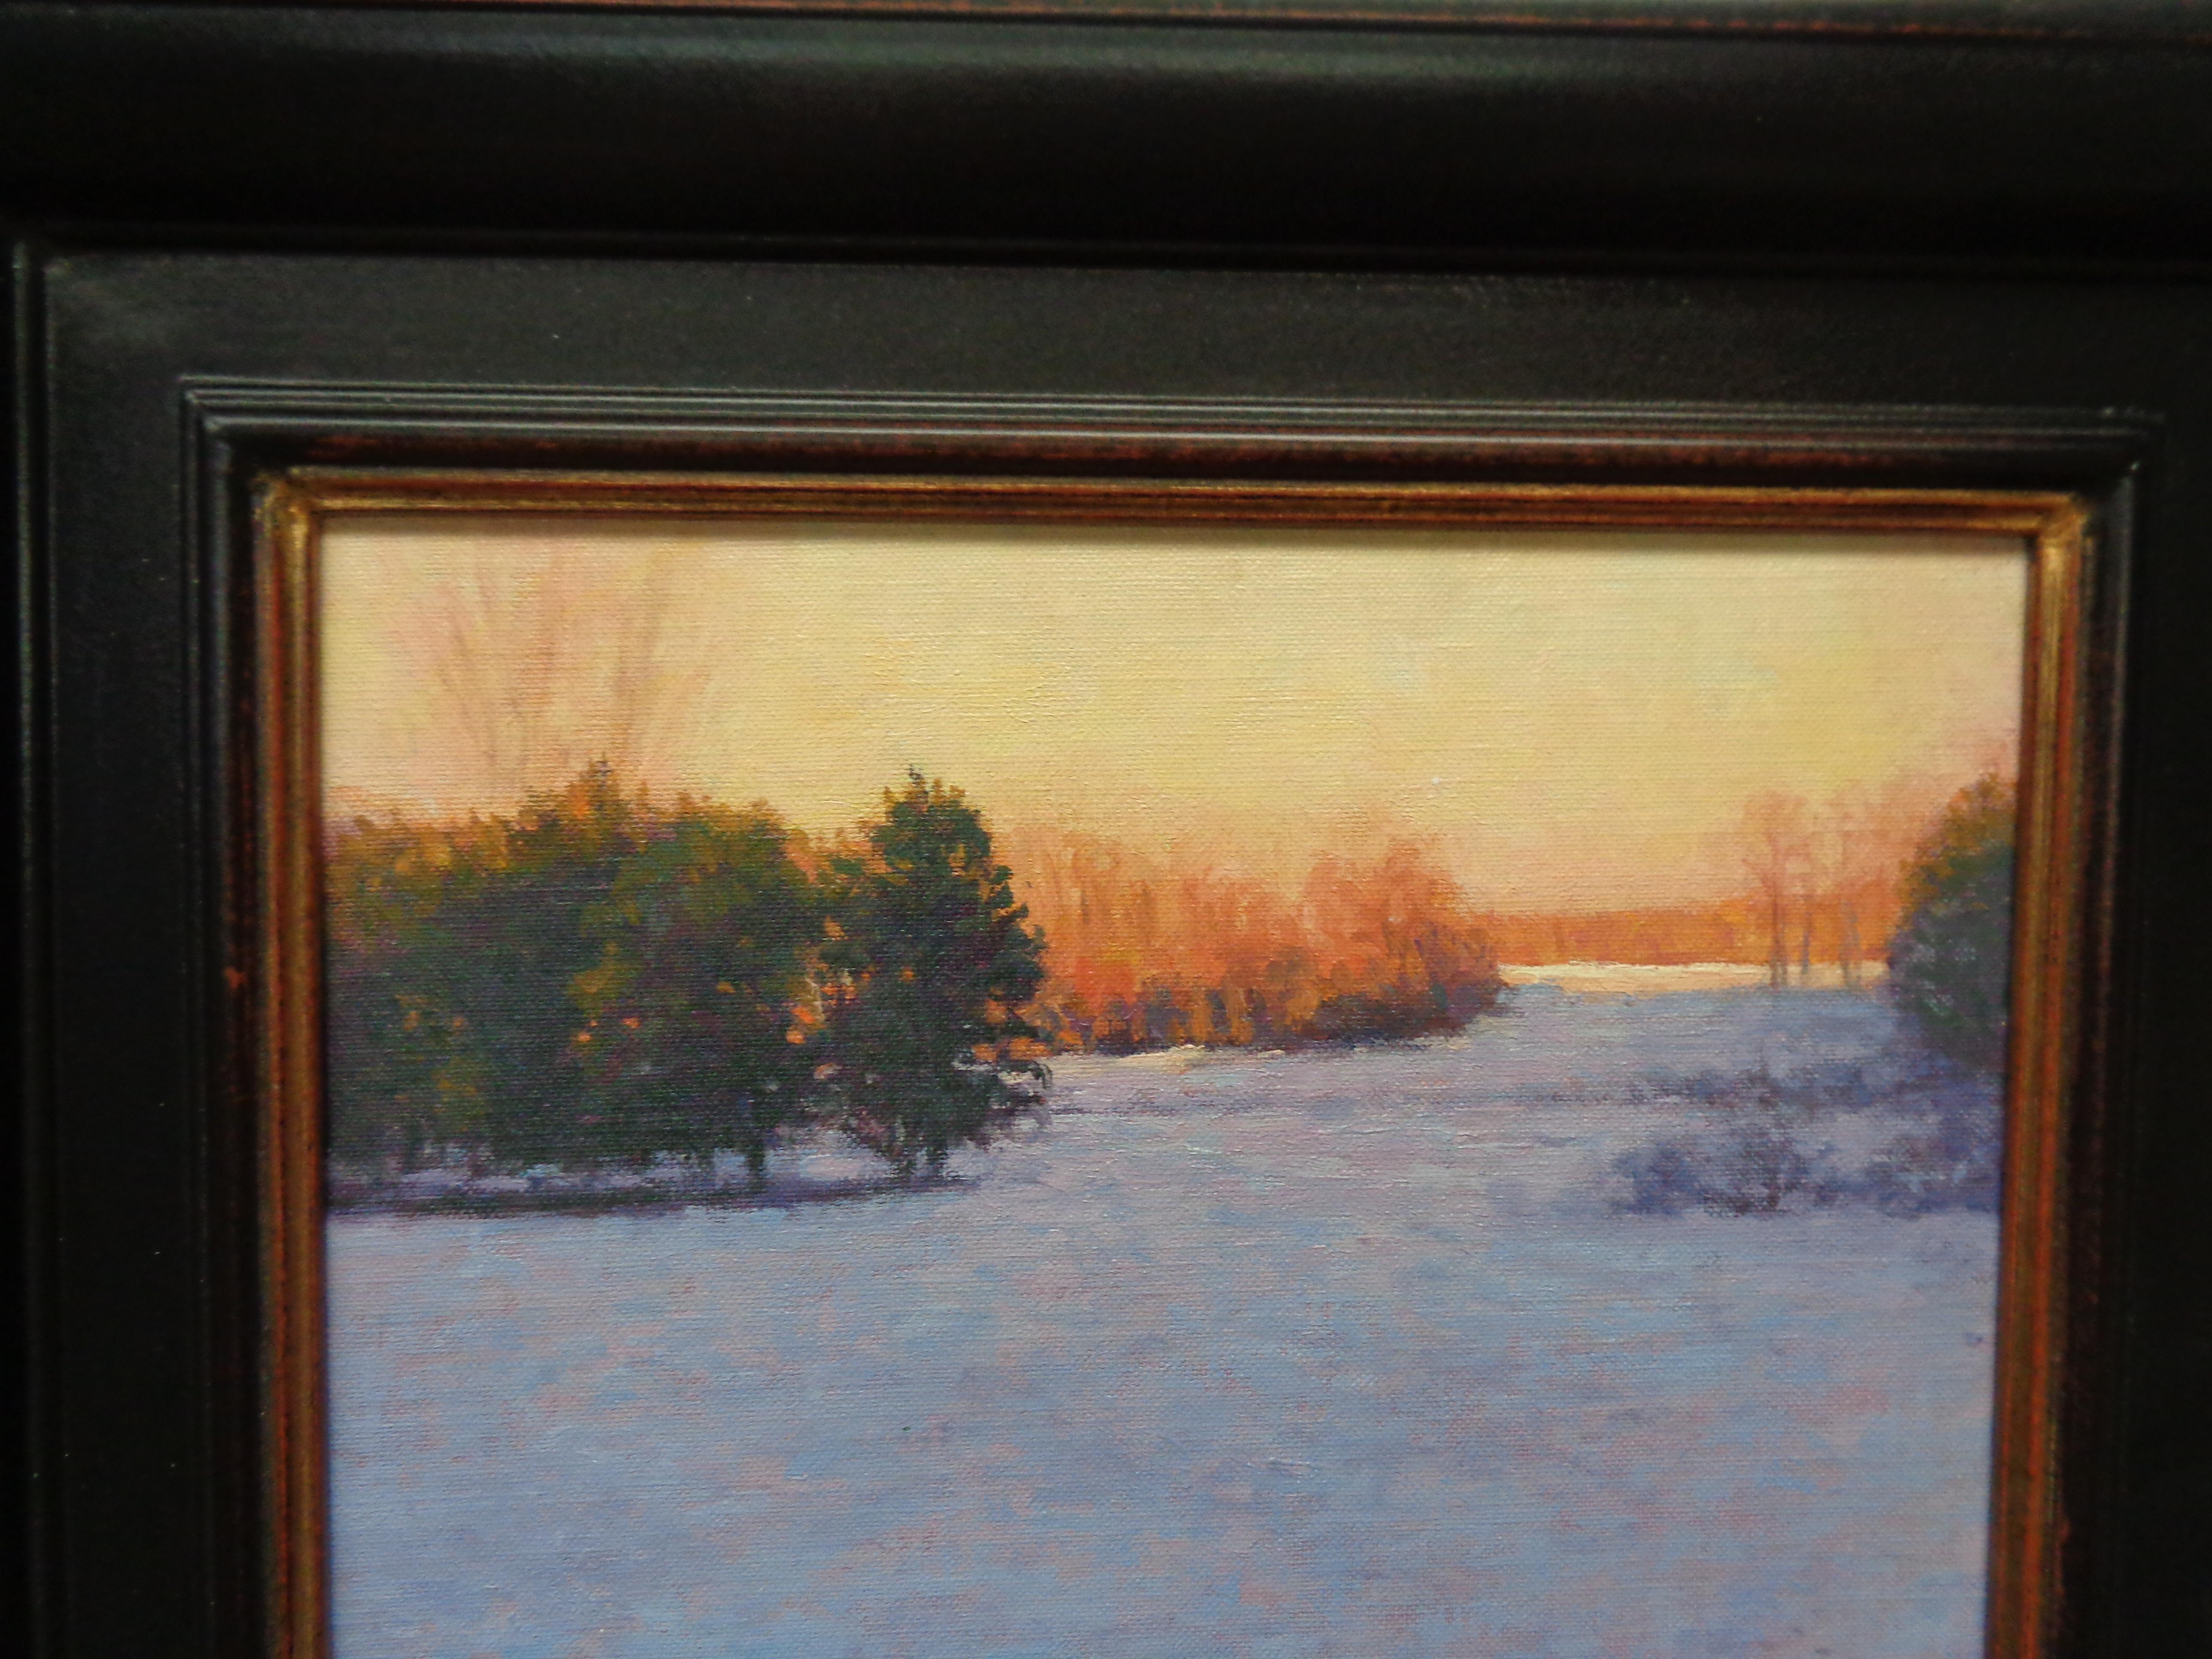  Impressionistic Winter Snow Landscape Oil Painting Michael Budden Evening Light For Sale 2